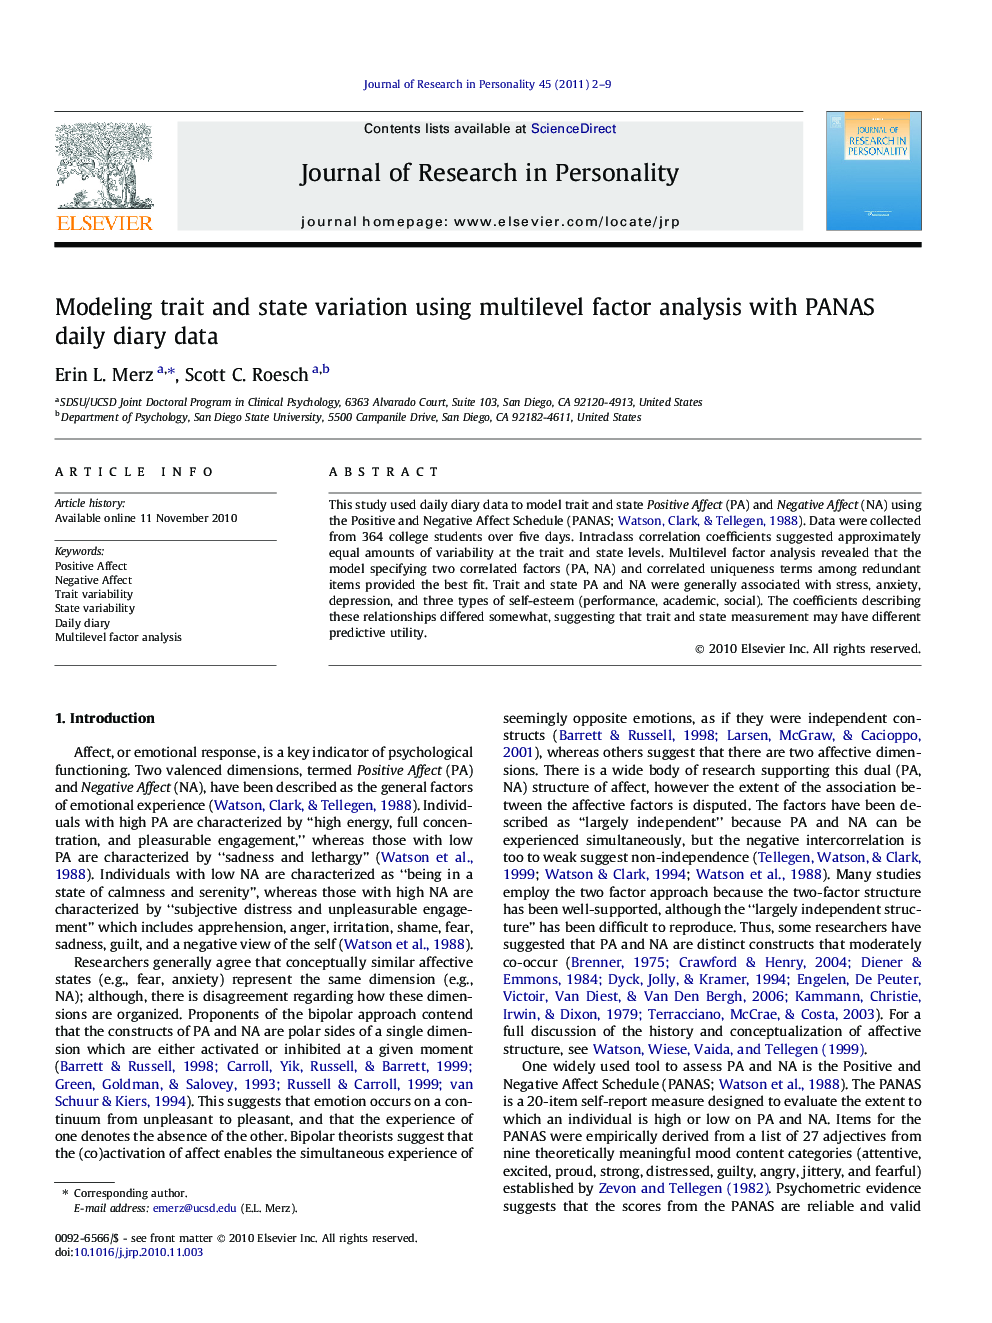 Modeling trait and state variation using multilevel factor analysis with PANAS daily diary data